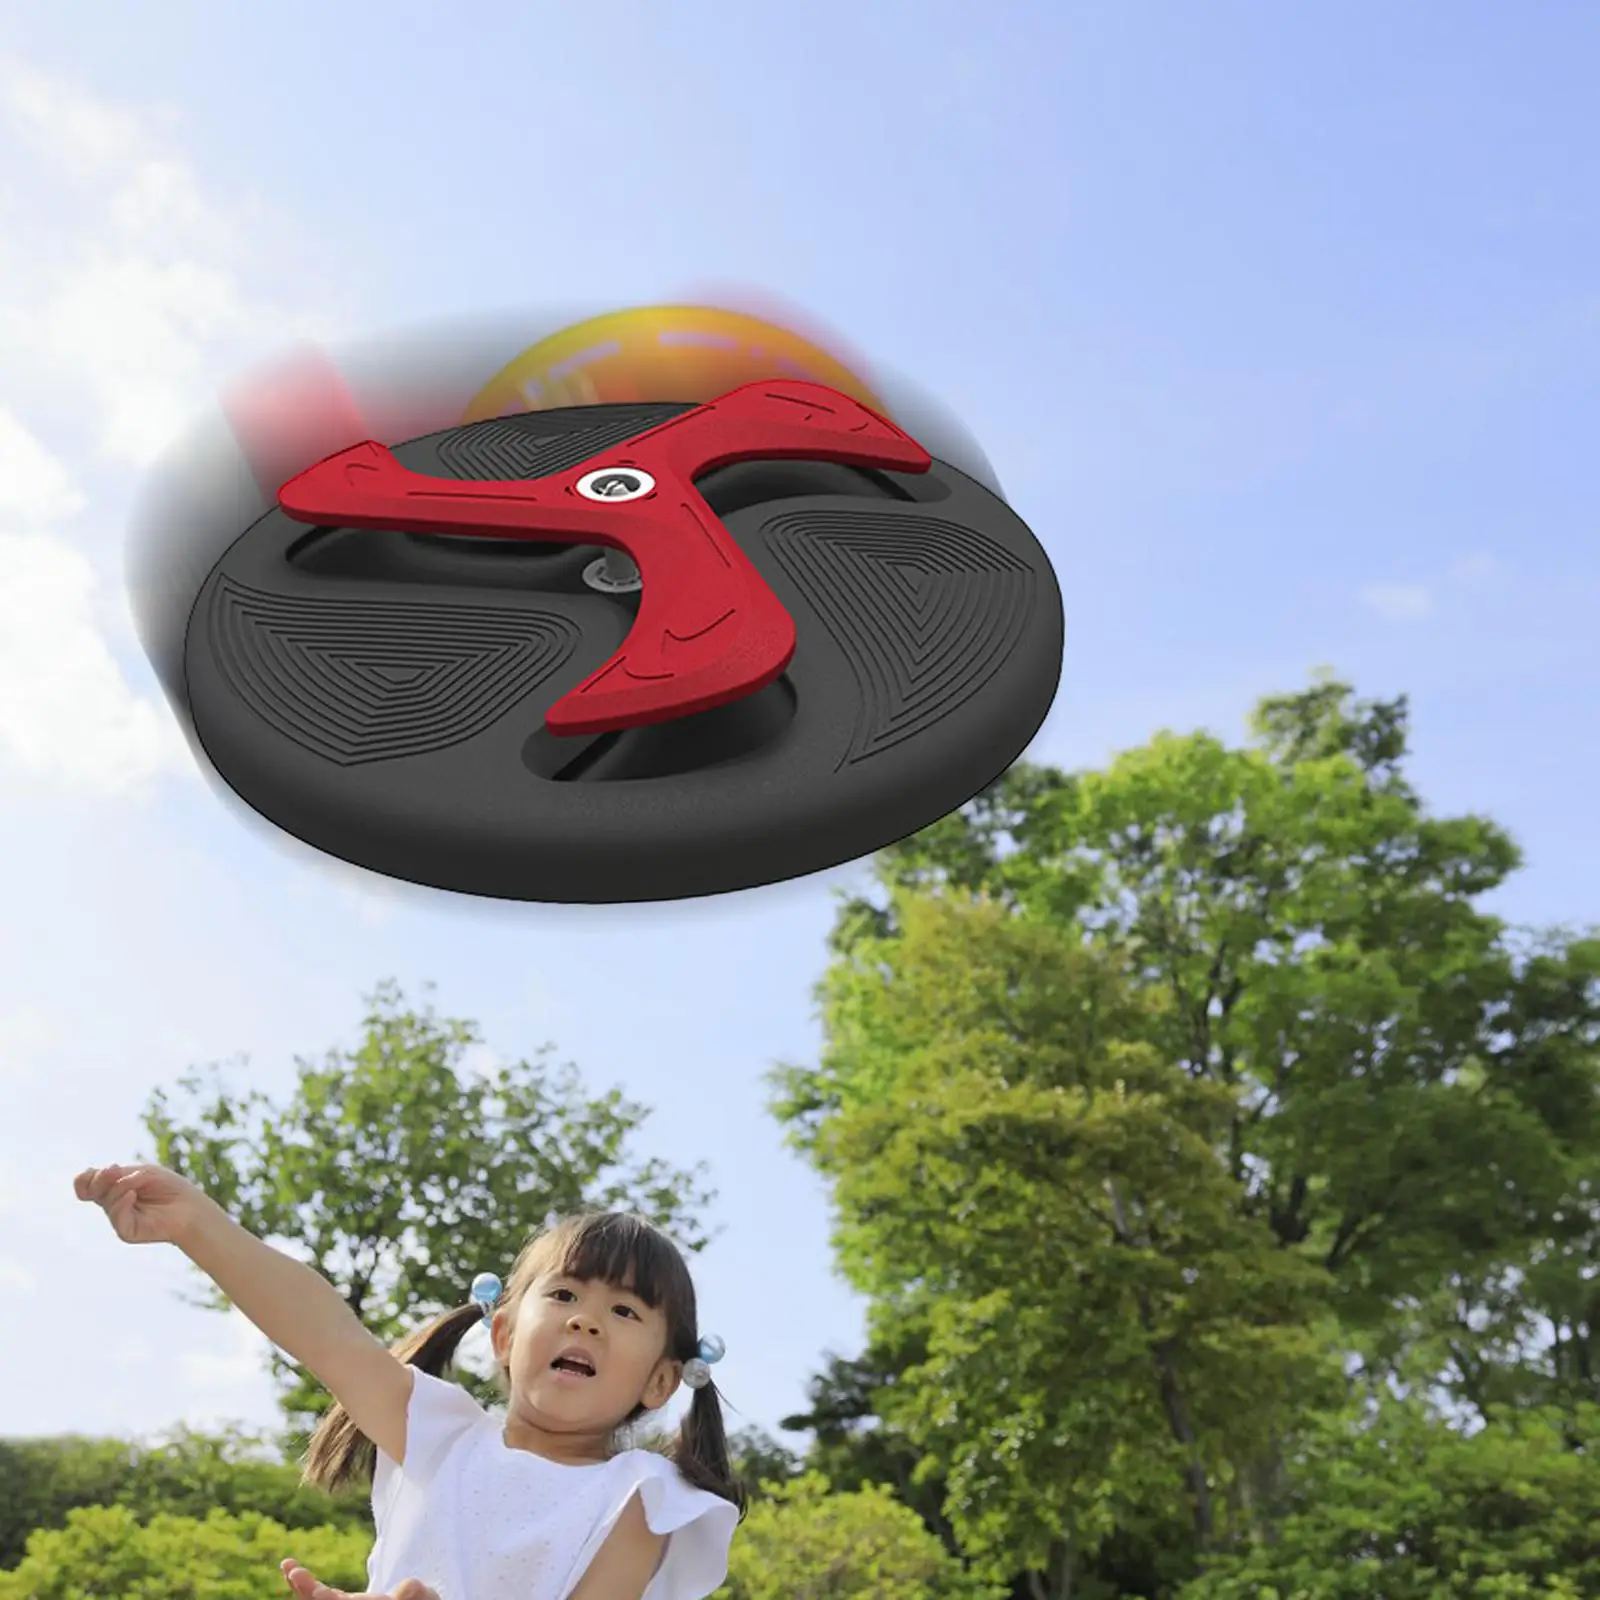 Kids Soft Flying Discs Portable Flying of Saucer for Game Activities Sports